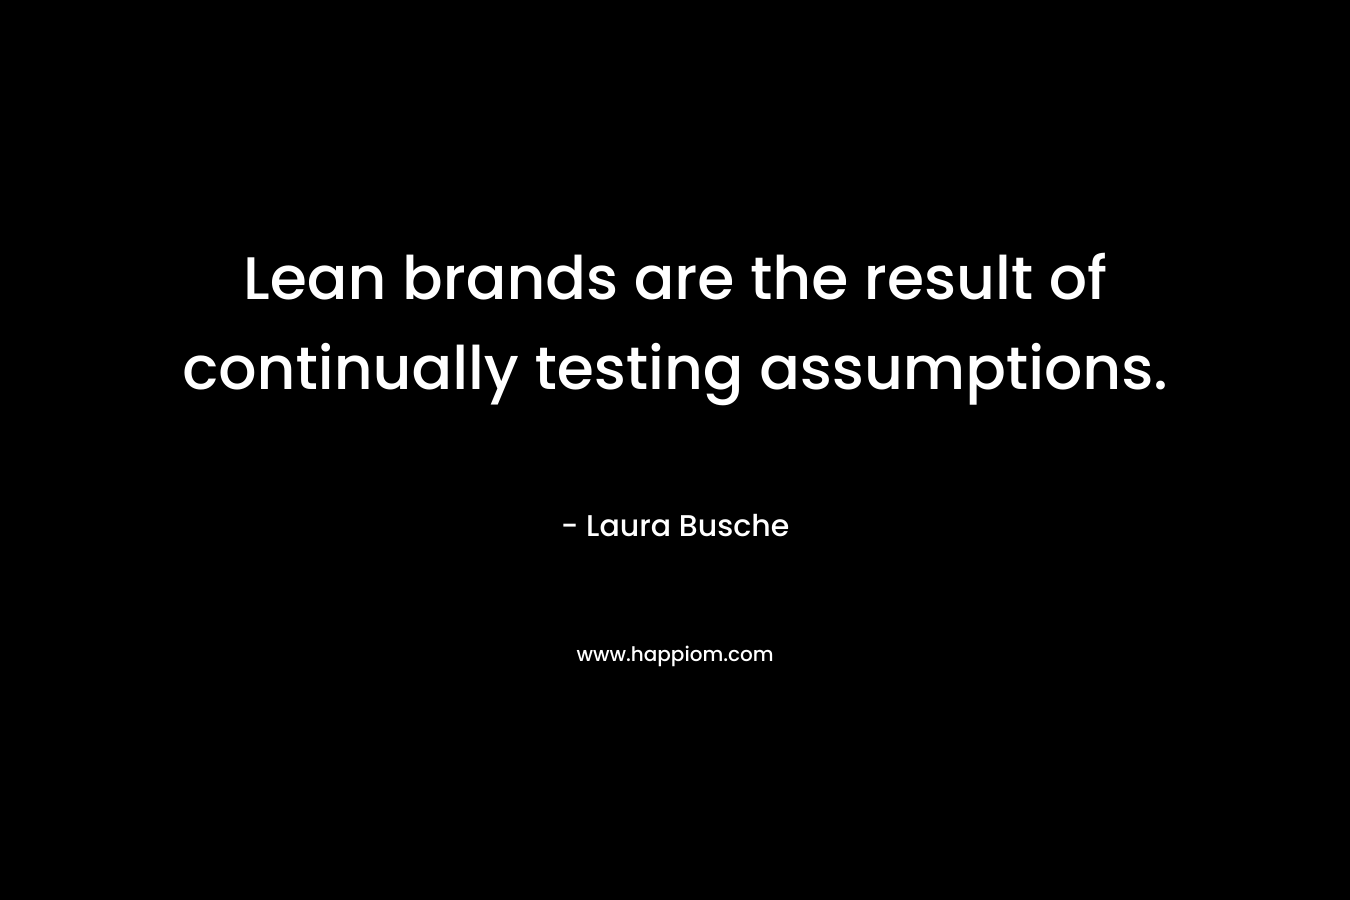 Lean brands are the result of continually testing assumptions. – Laura Busche